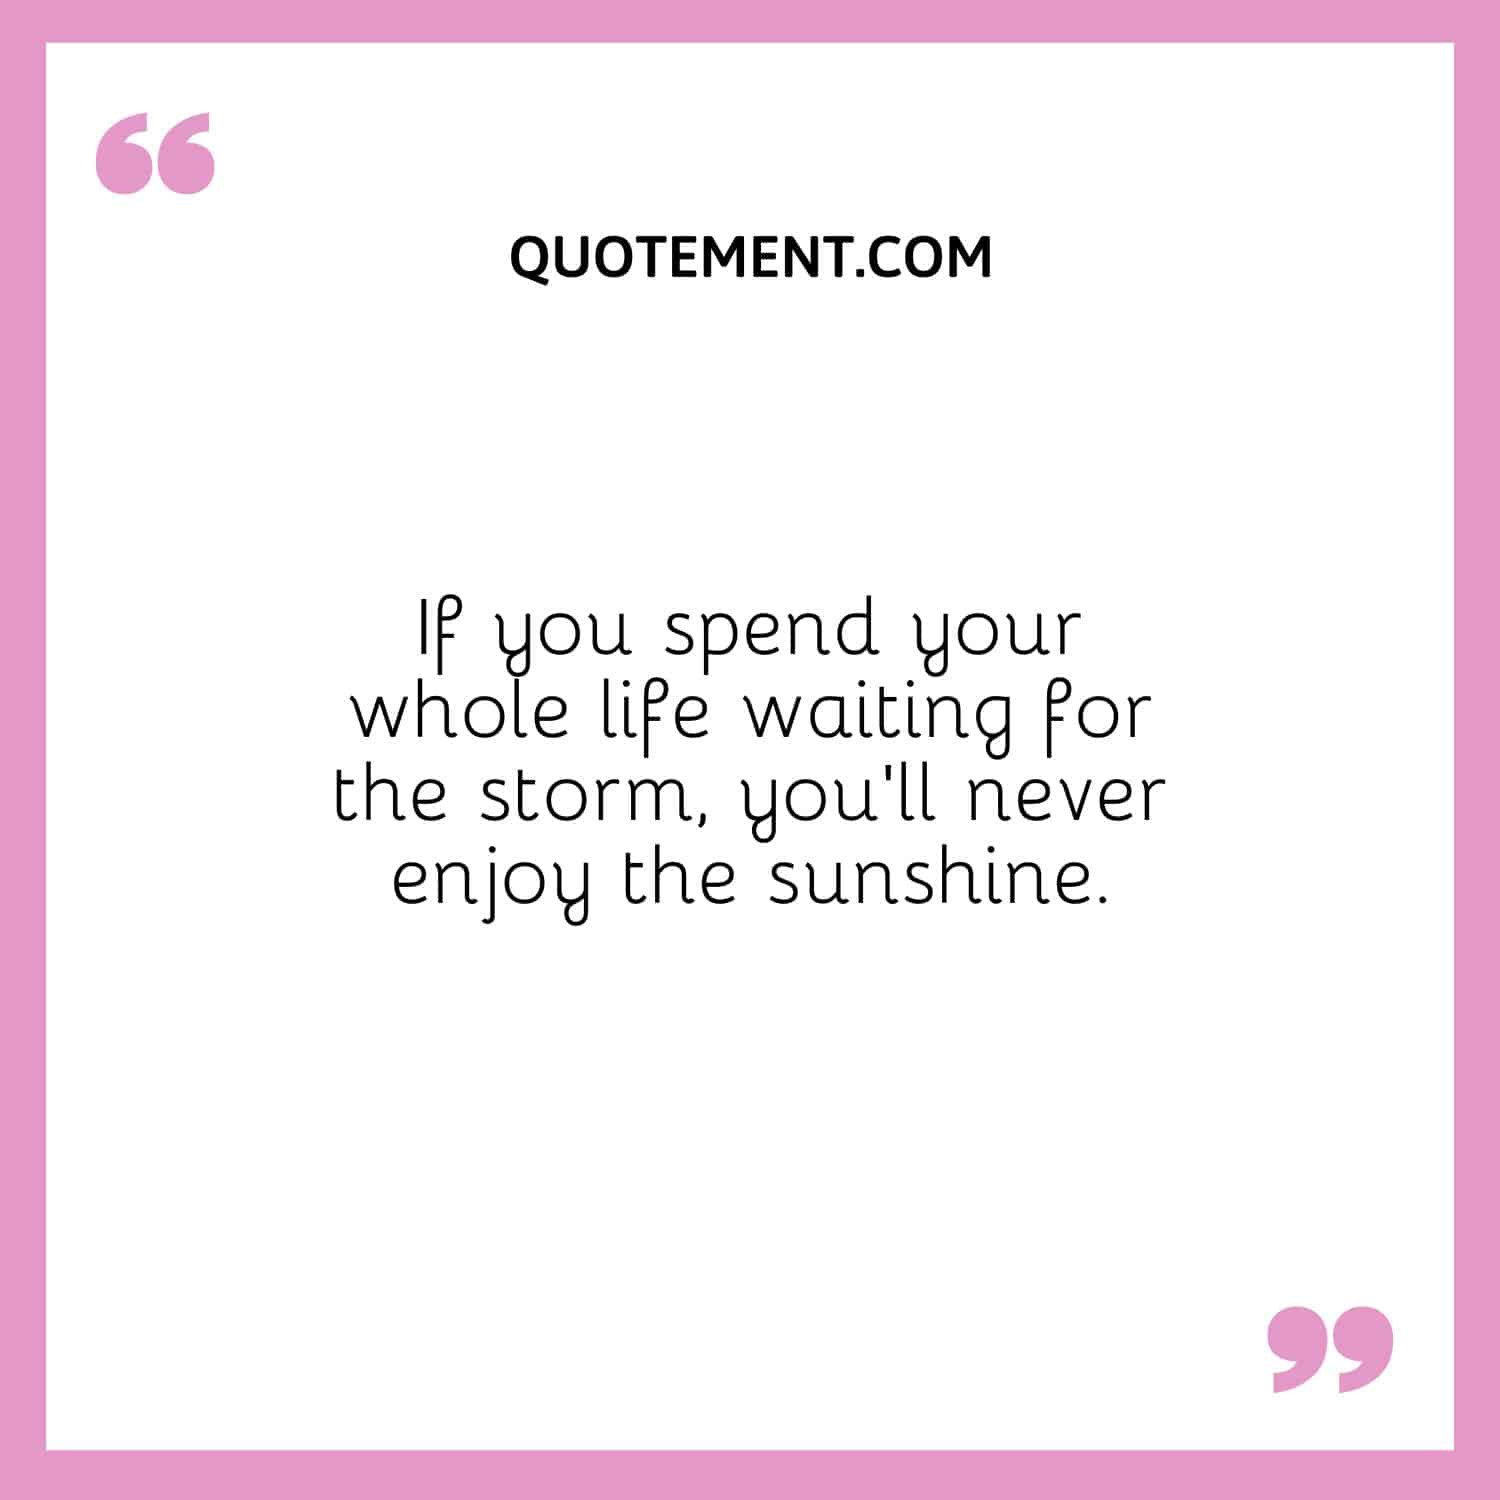 If you spend your whole life waiting for the storm, you’ll never enjoy the sunshine.